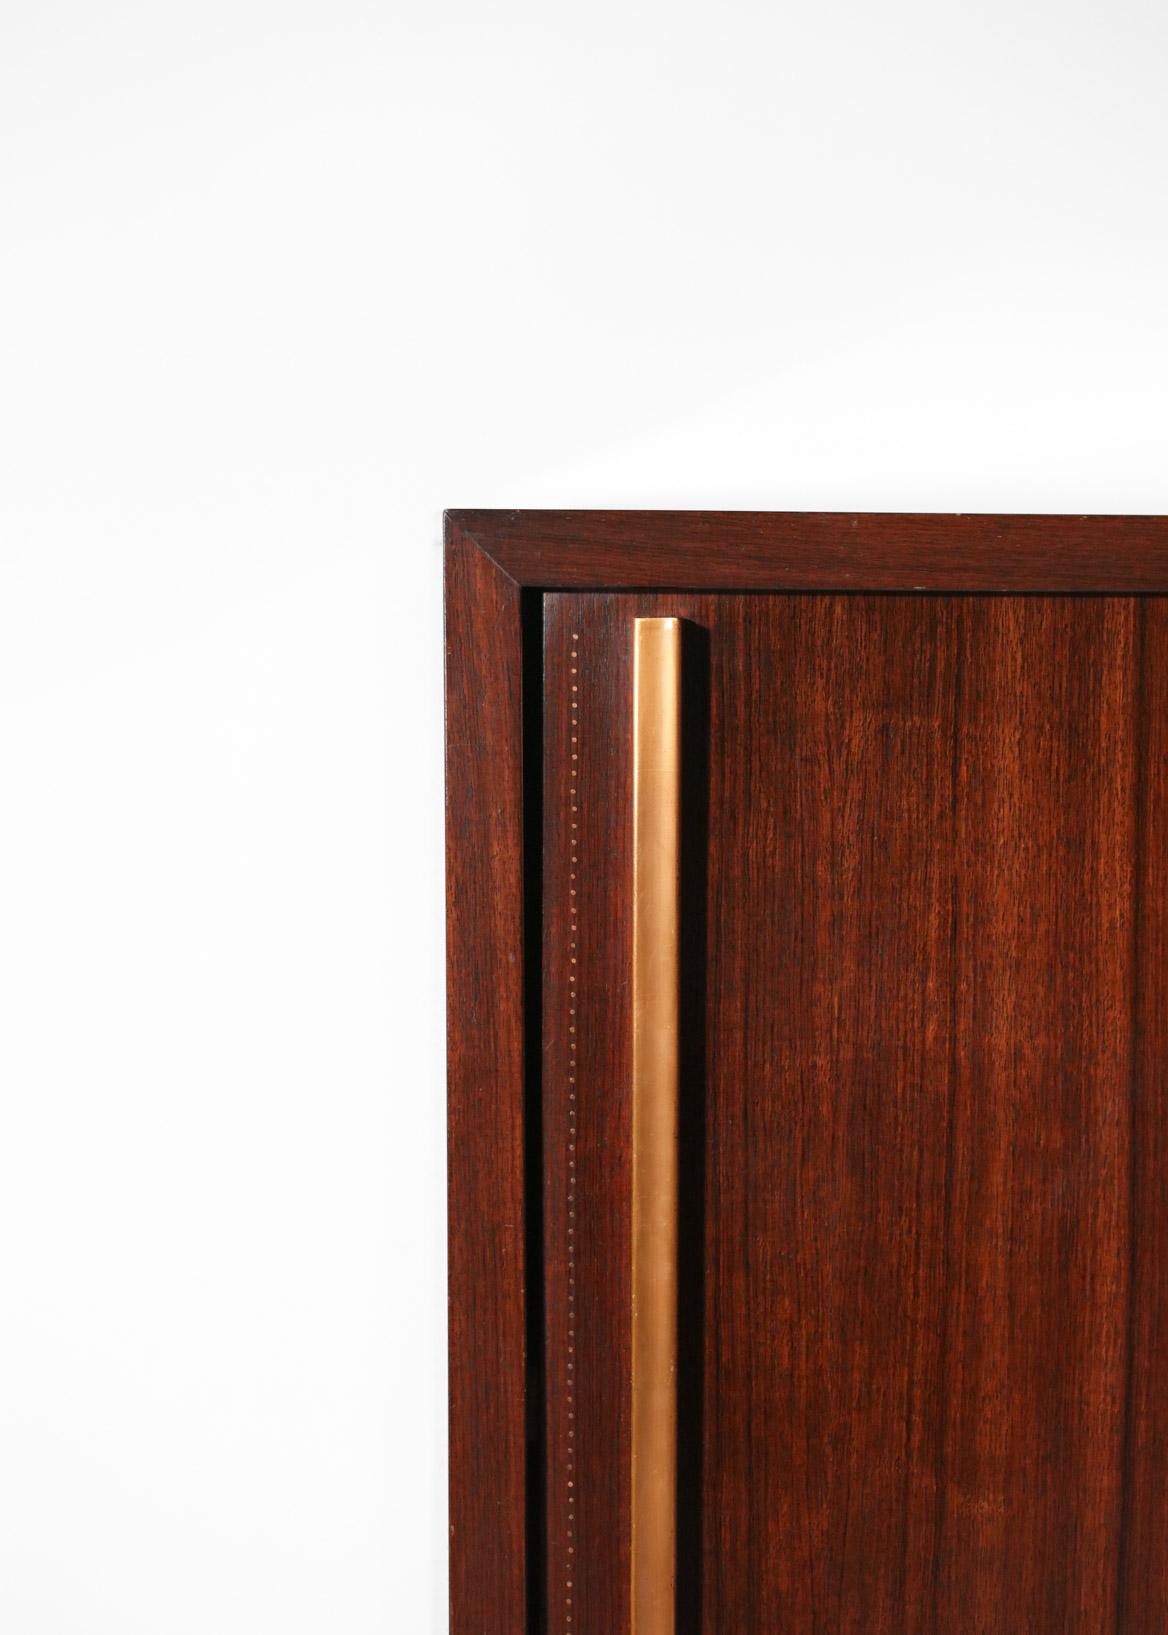 Hand-Crafted Rare André Sornay French Wardrobes Armoires Art Deco Modernist 40s - F613 For Sale